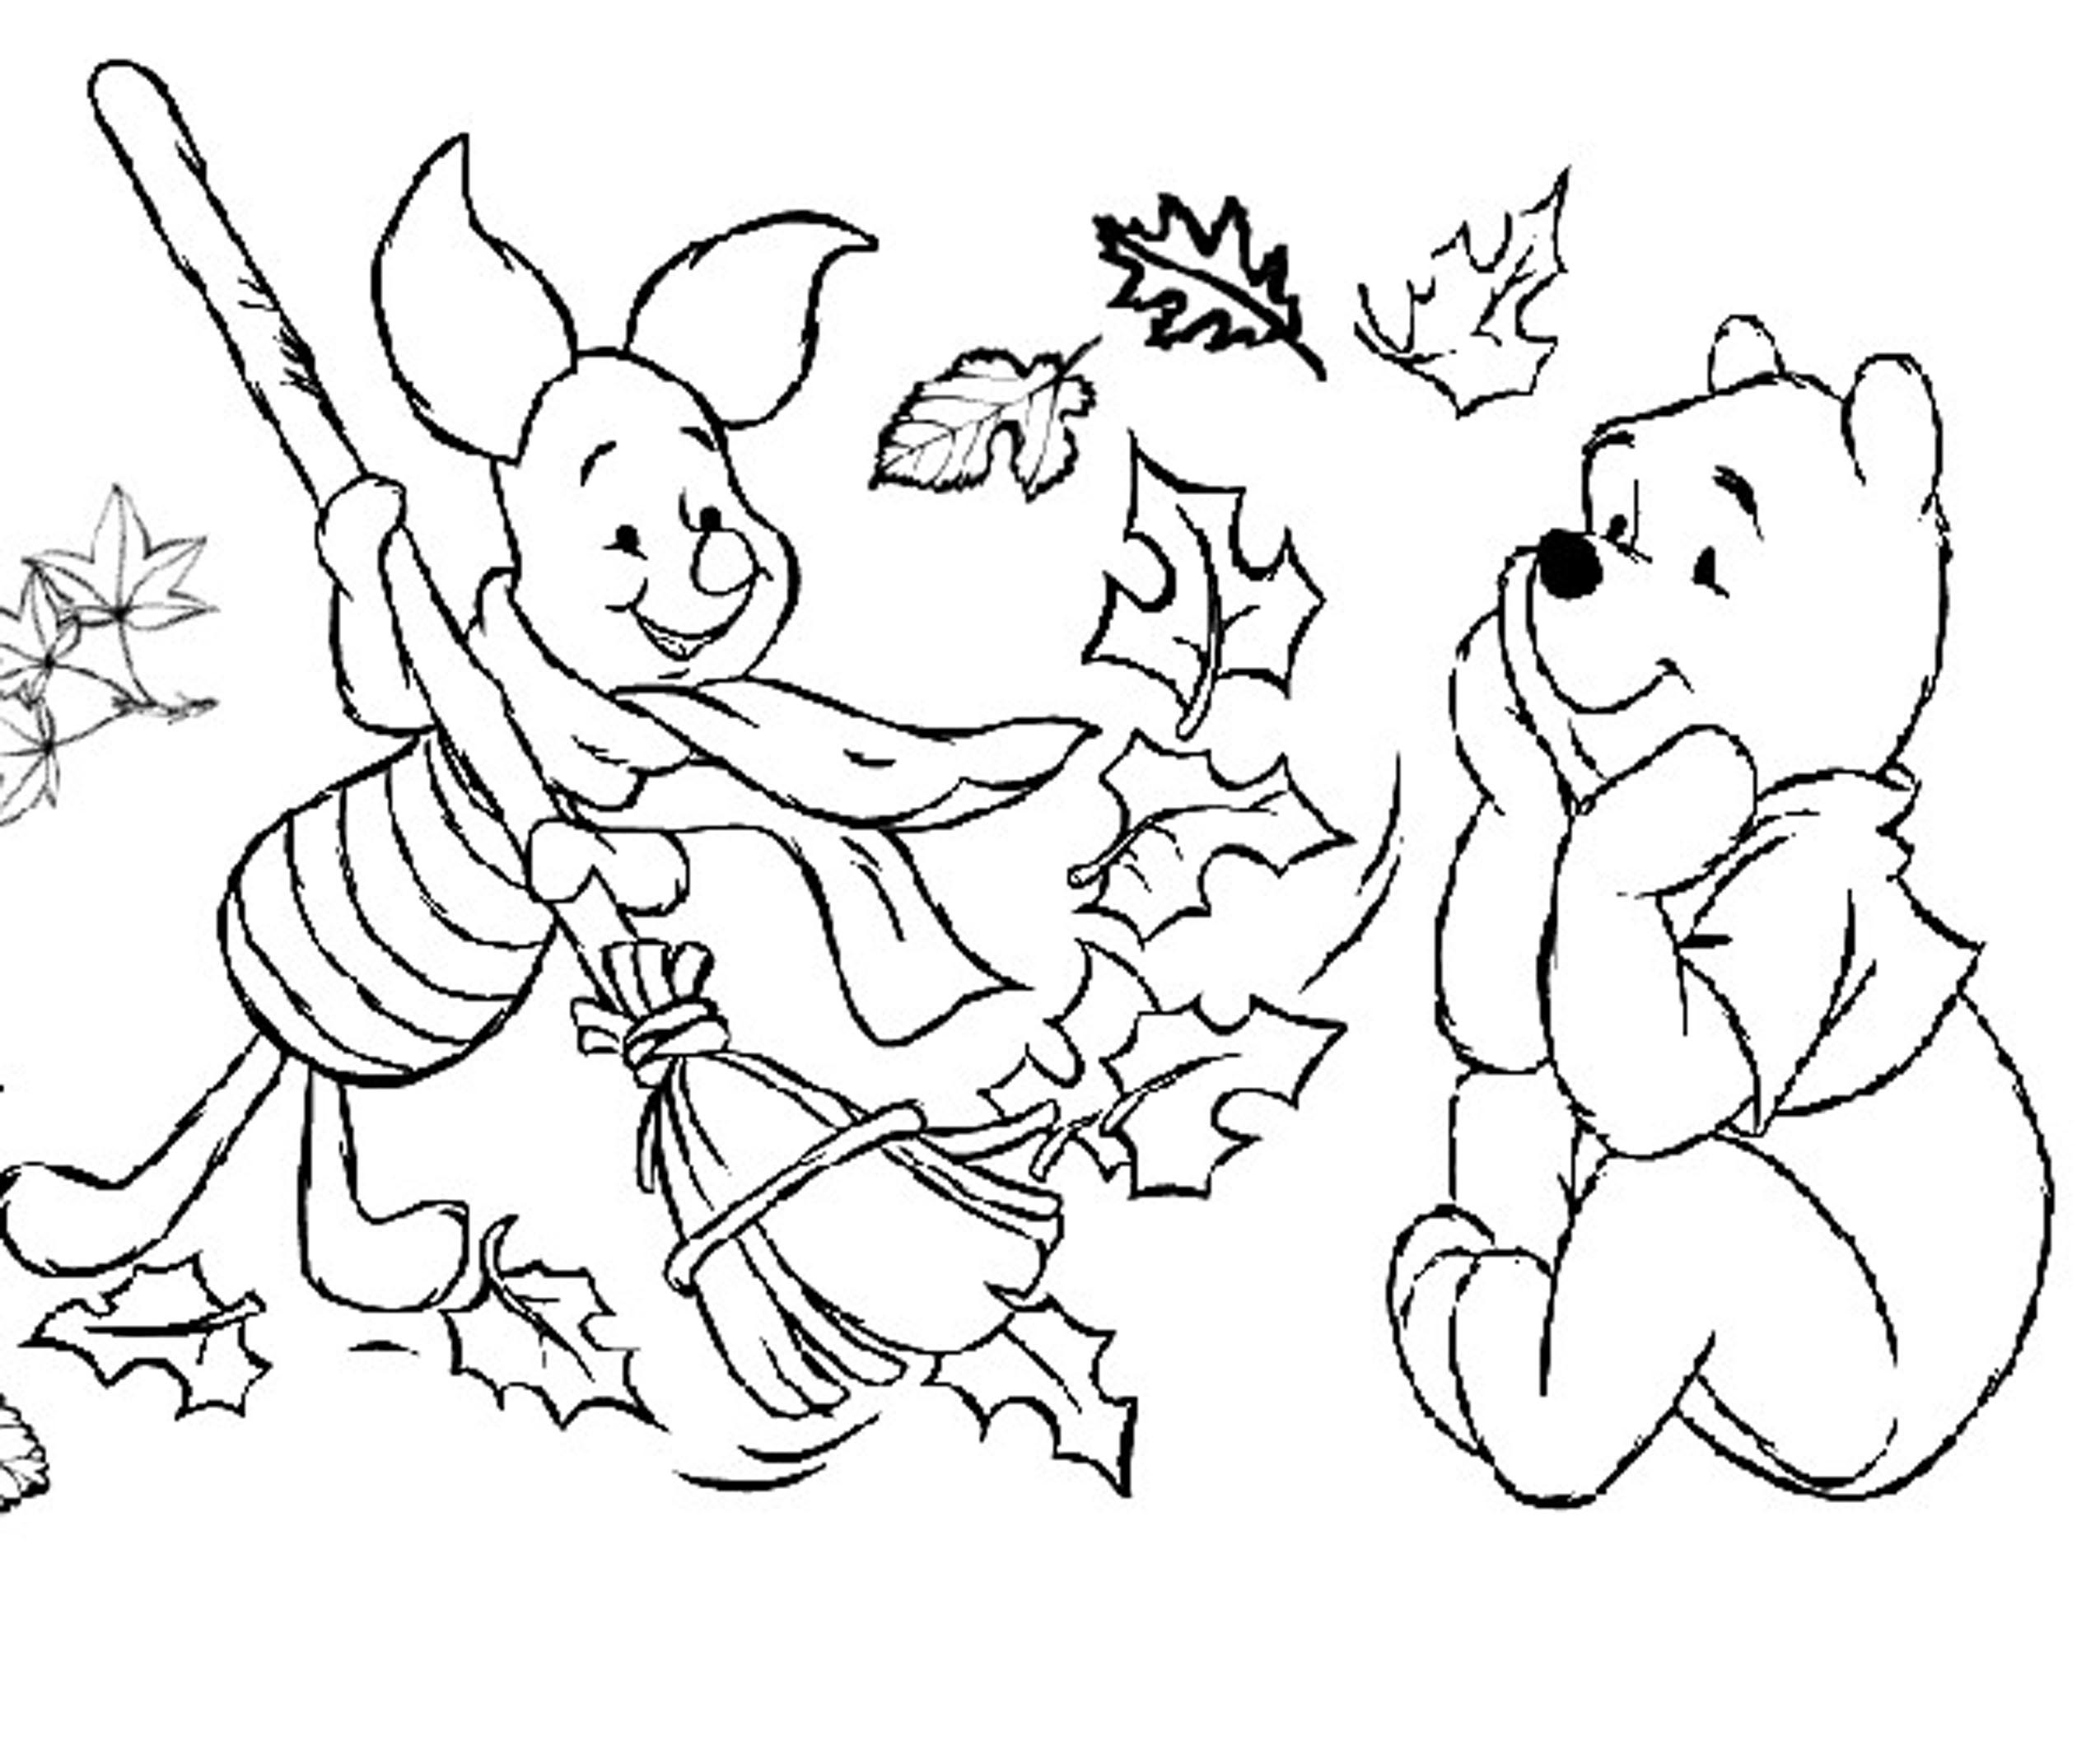 Coloring pages free printable autumn coloring pages